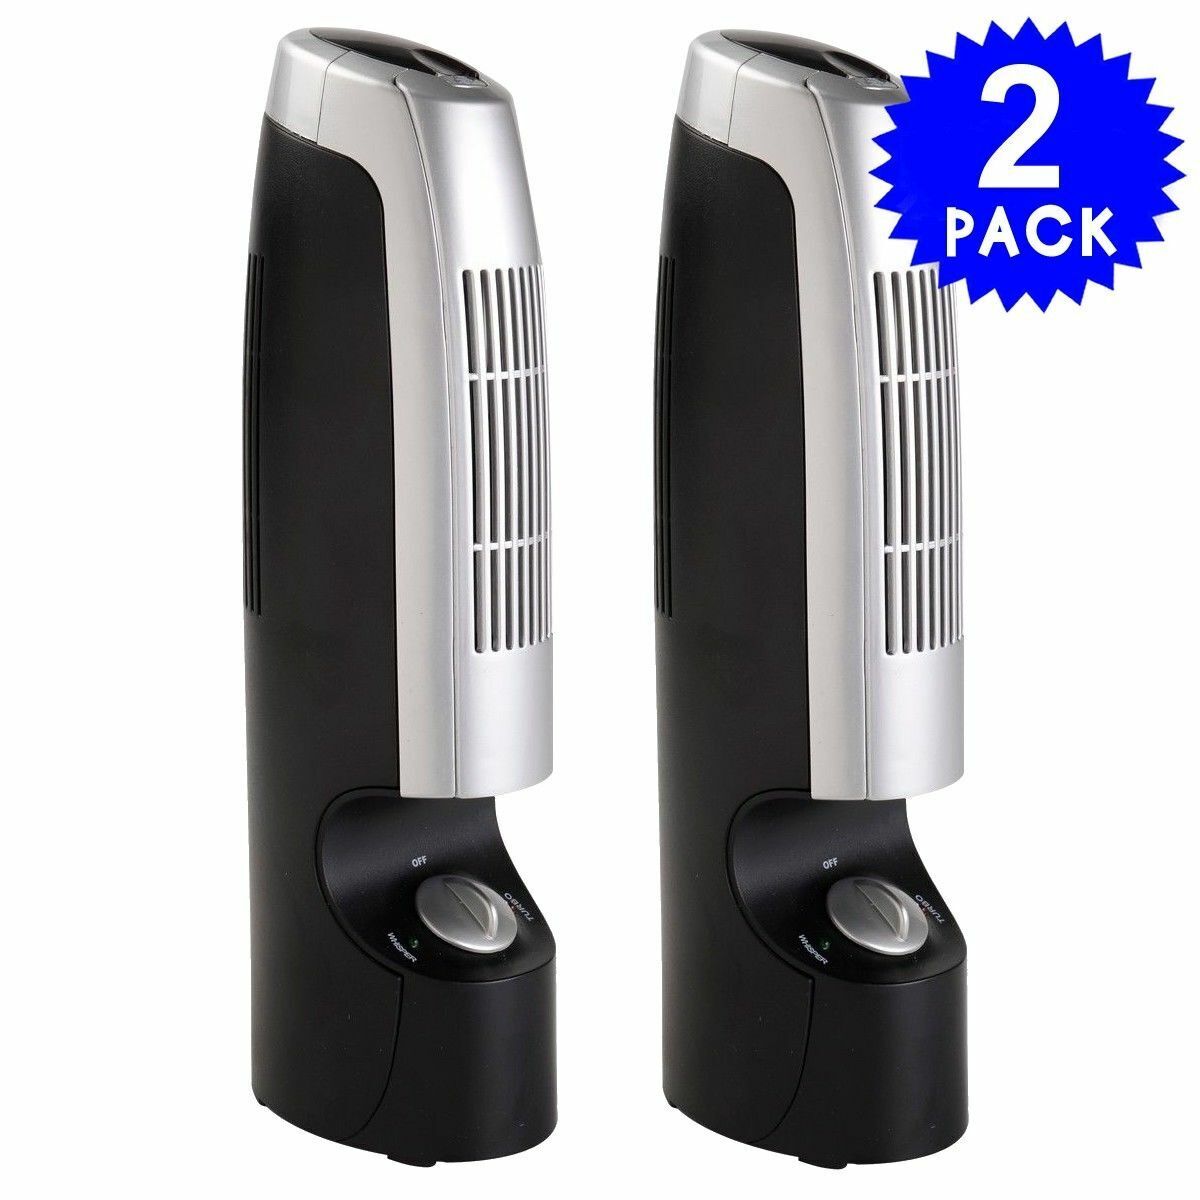 Costway 2 PCS Mini Ionic Whisper Pro Filter 2 Speed Home Air Purifier & Ionizer